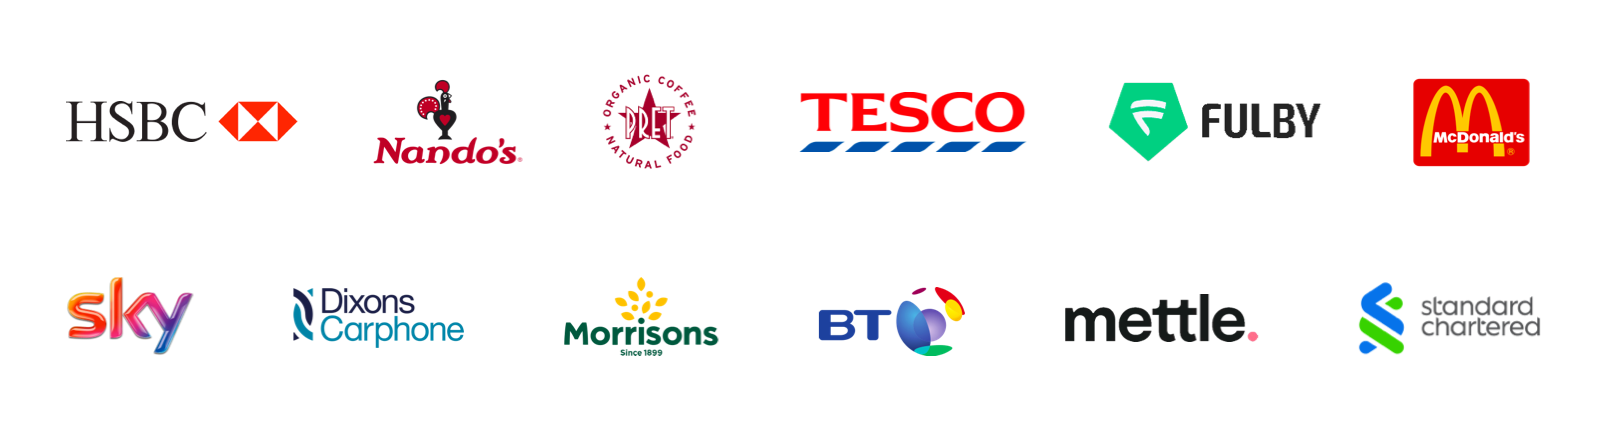 Logos of companies that we have worked with, including Fulby, Mettle, Dixons Carphone and Nandos